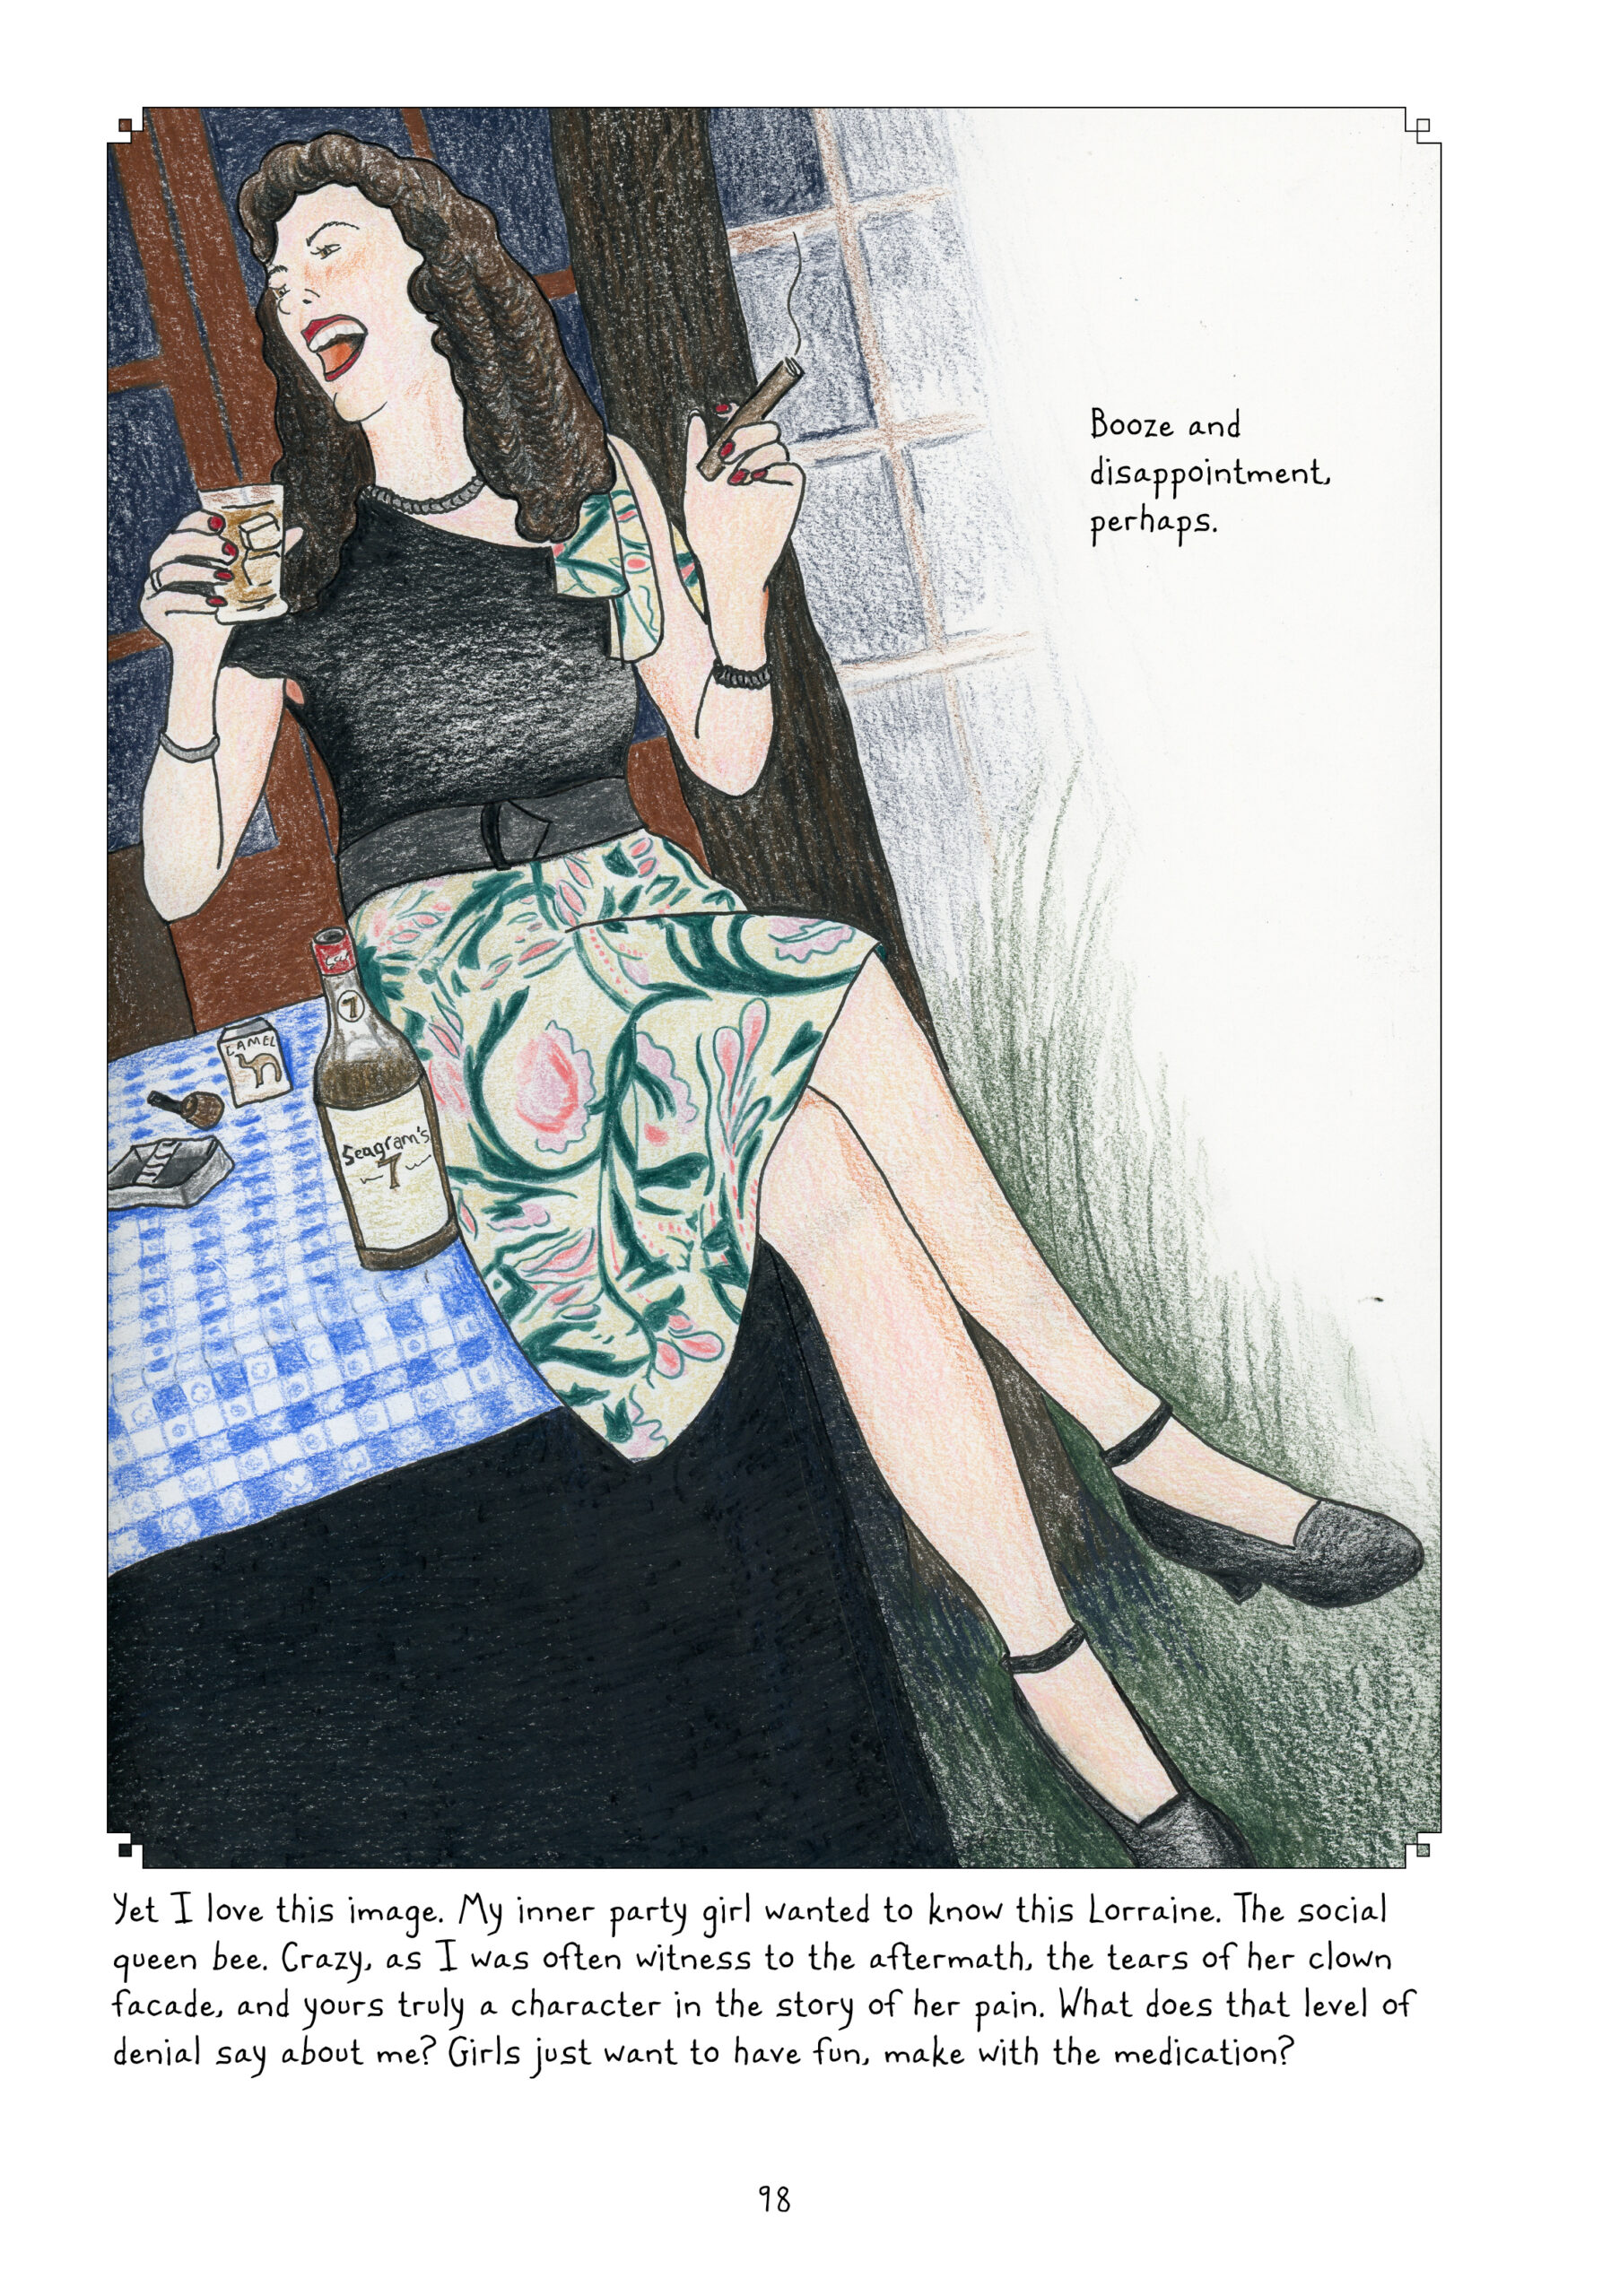 Another one-panel page. A young Lorraine, perhaps in her late twenties, sits on a table topped with a blue gingham cloth,  pack of cigarettes, and a bottle of Seagramâ€™s 7. She is holding a glass of it on the rocks in one hand, cigar in the other, and sheâ€™s laughing boisterously at someone off panel to her right. Her hair still falls past her shoulders, but her curls are tighter. She is wearing a lack blouse with one sleeveless shoulder, a floral print knee-length skirt, and black heels. She has jewelry and makeup on, looking glamorous. 
Lynn continues her narration, â€œBooze and disappointment, perhaps. Yet I love this image. My inner party girl wanted to know this Lorraine. The social queen bee. Crazy, as I was often witness to the aftermath, the tears of her clown facade, and yours truly a character in the story of her pain. What does that level of denial say about me? Girls just want to have fun, make with the medication?â€